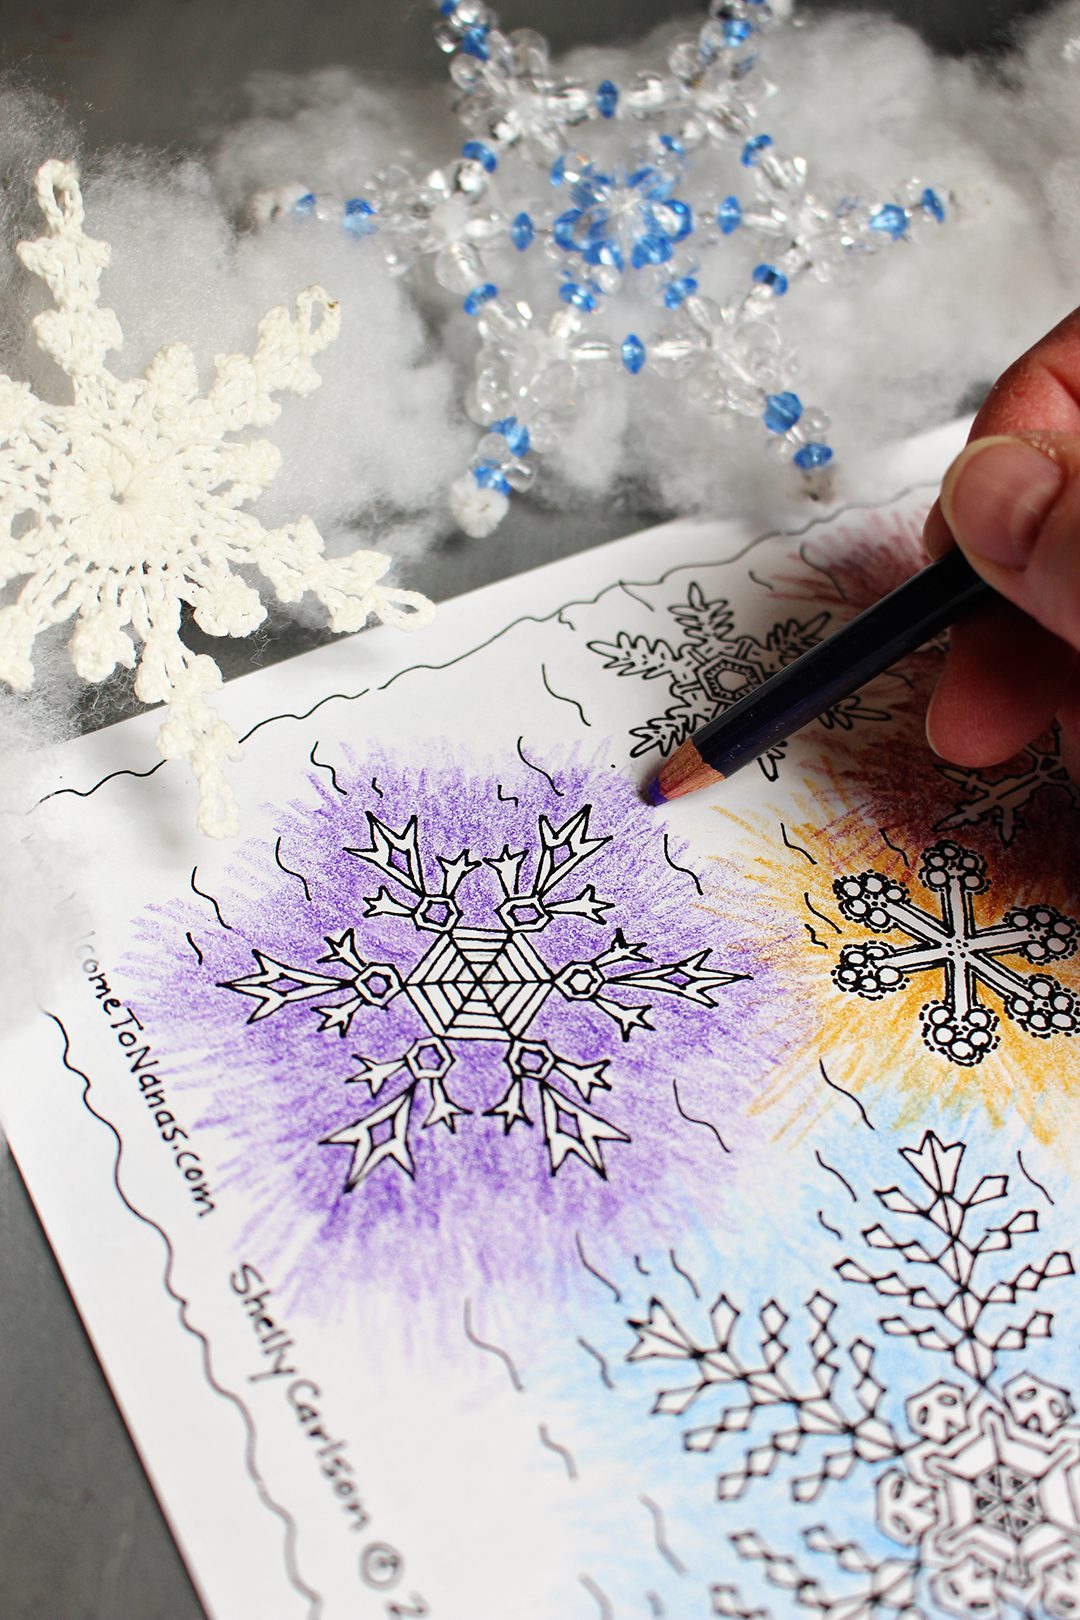 Coloring orange, green, and purple snowflakes with a purple colored pencil.